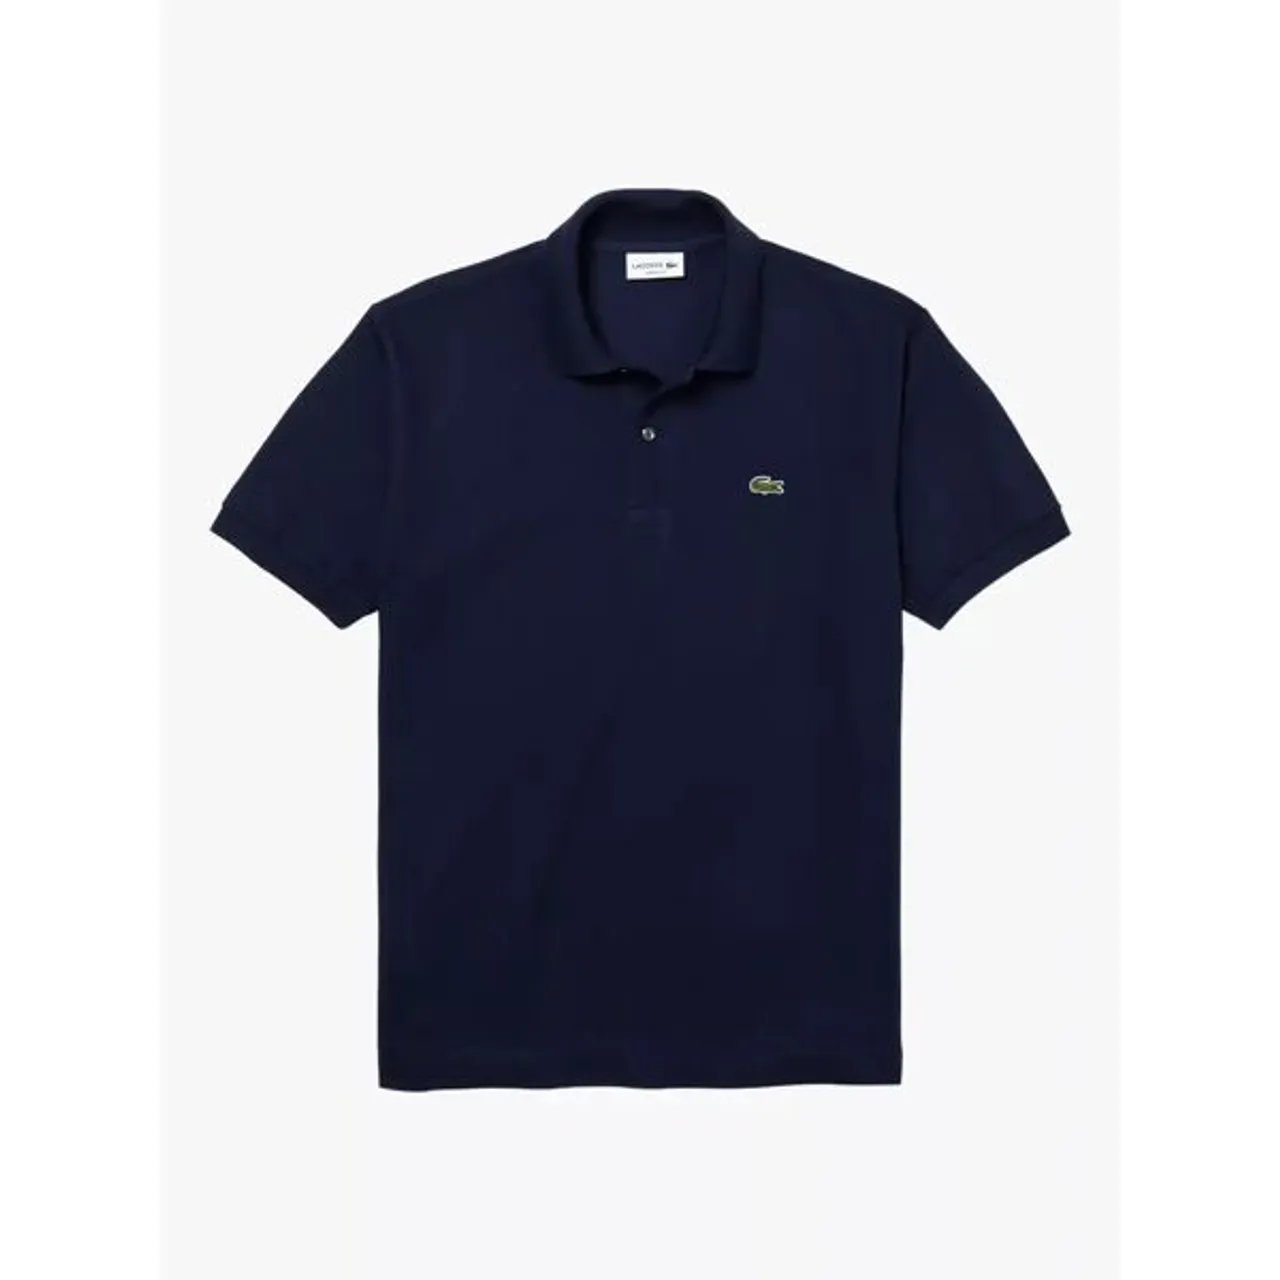 Lacoste L.12.12 Classic Regular Fit Short Sleeve Polo Shirt - Navy - Male